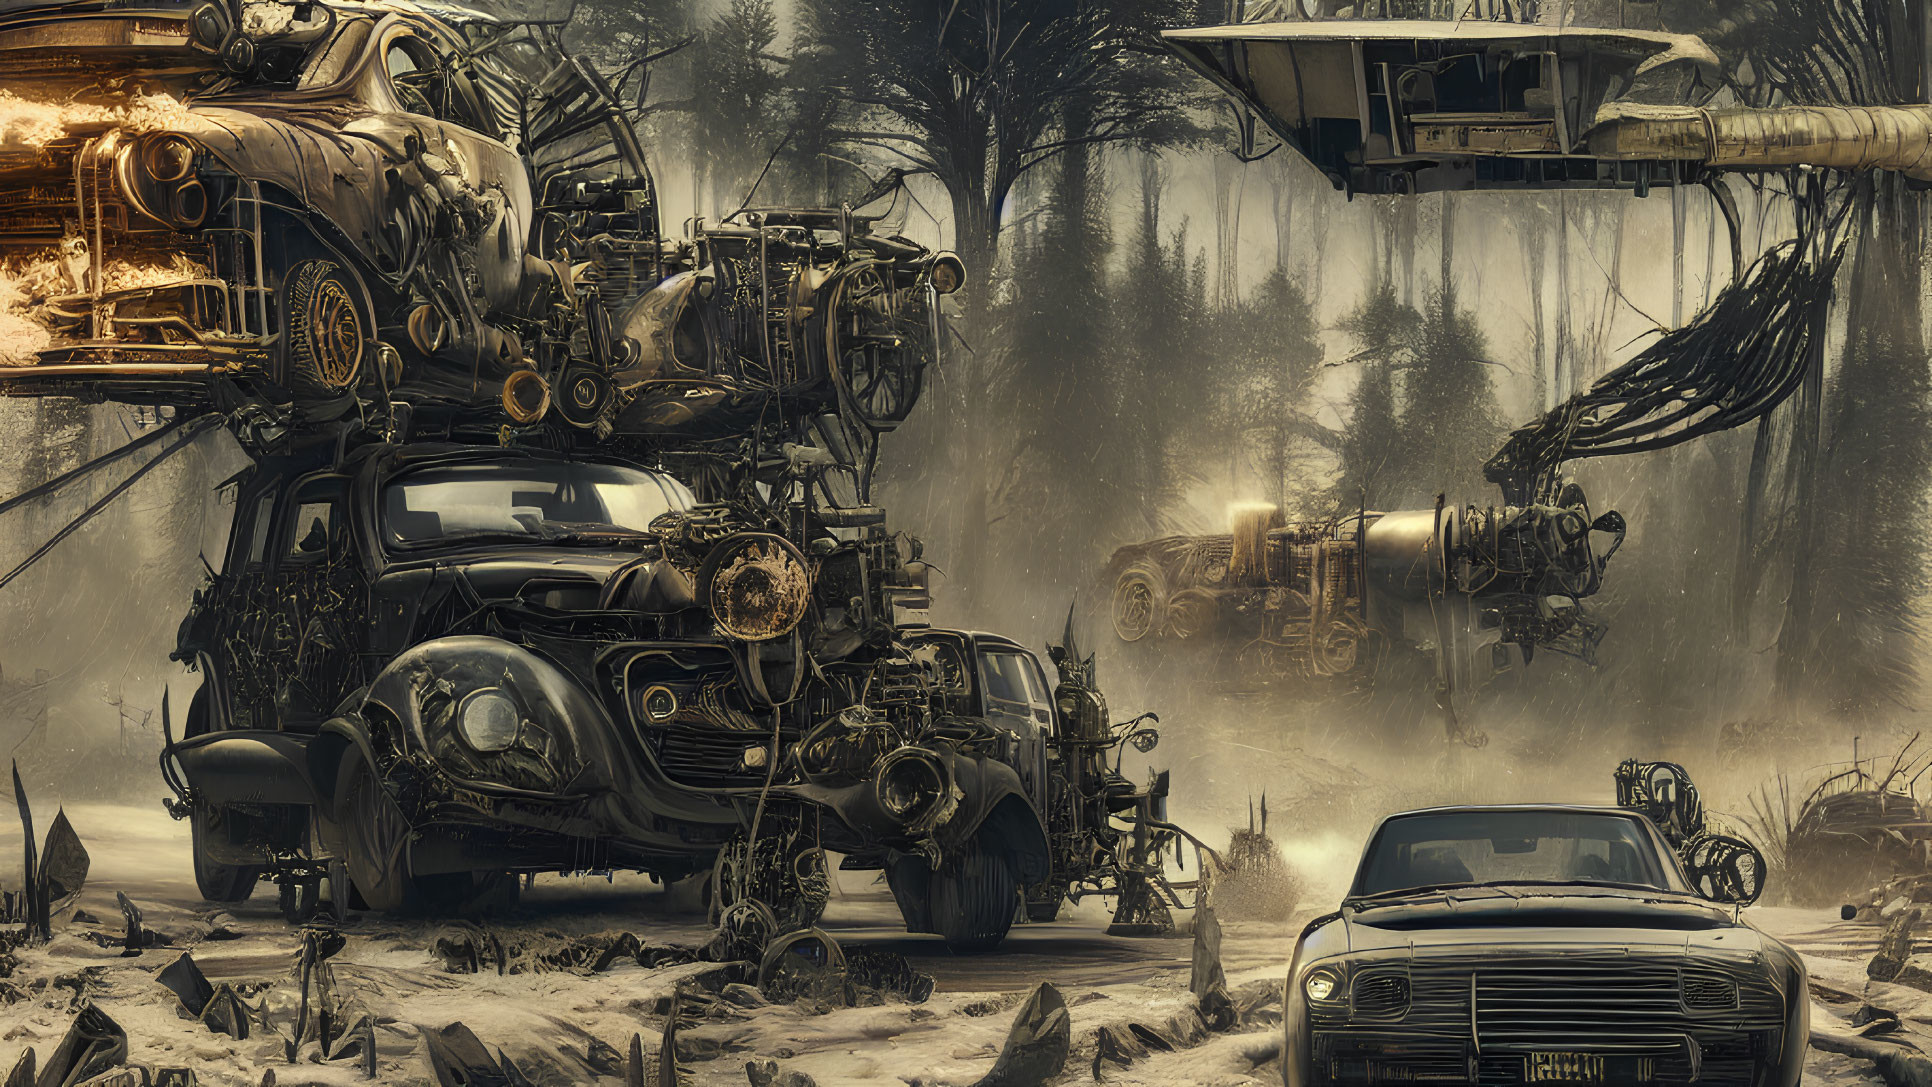 Dystopian scene with stacked cars, mechanical parts, and hovering platform in foggy woods